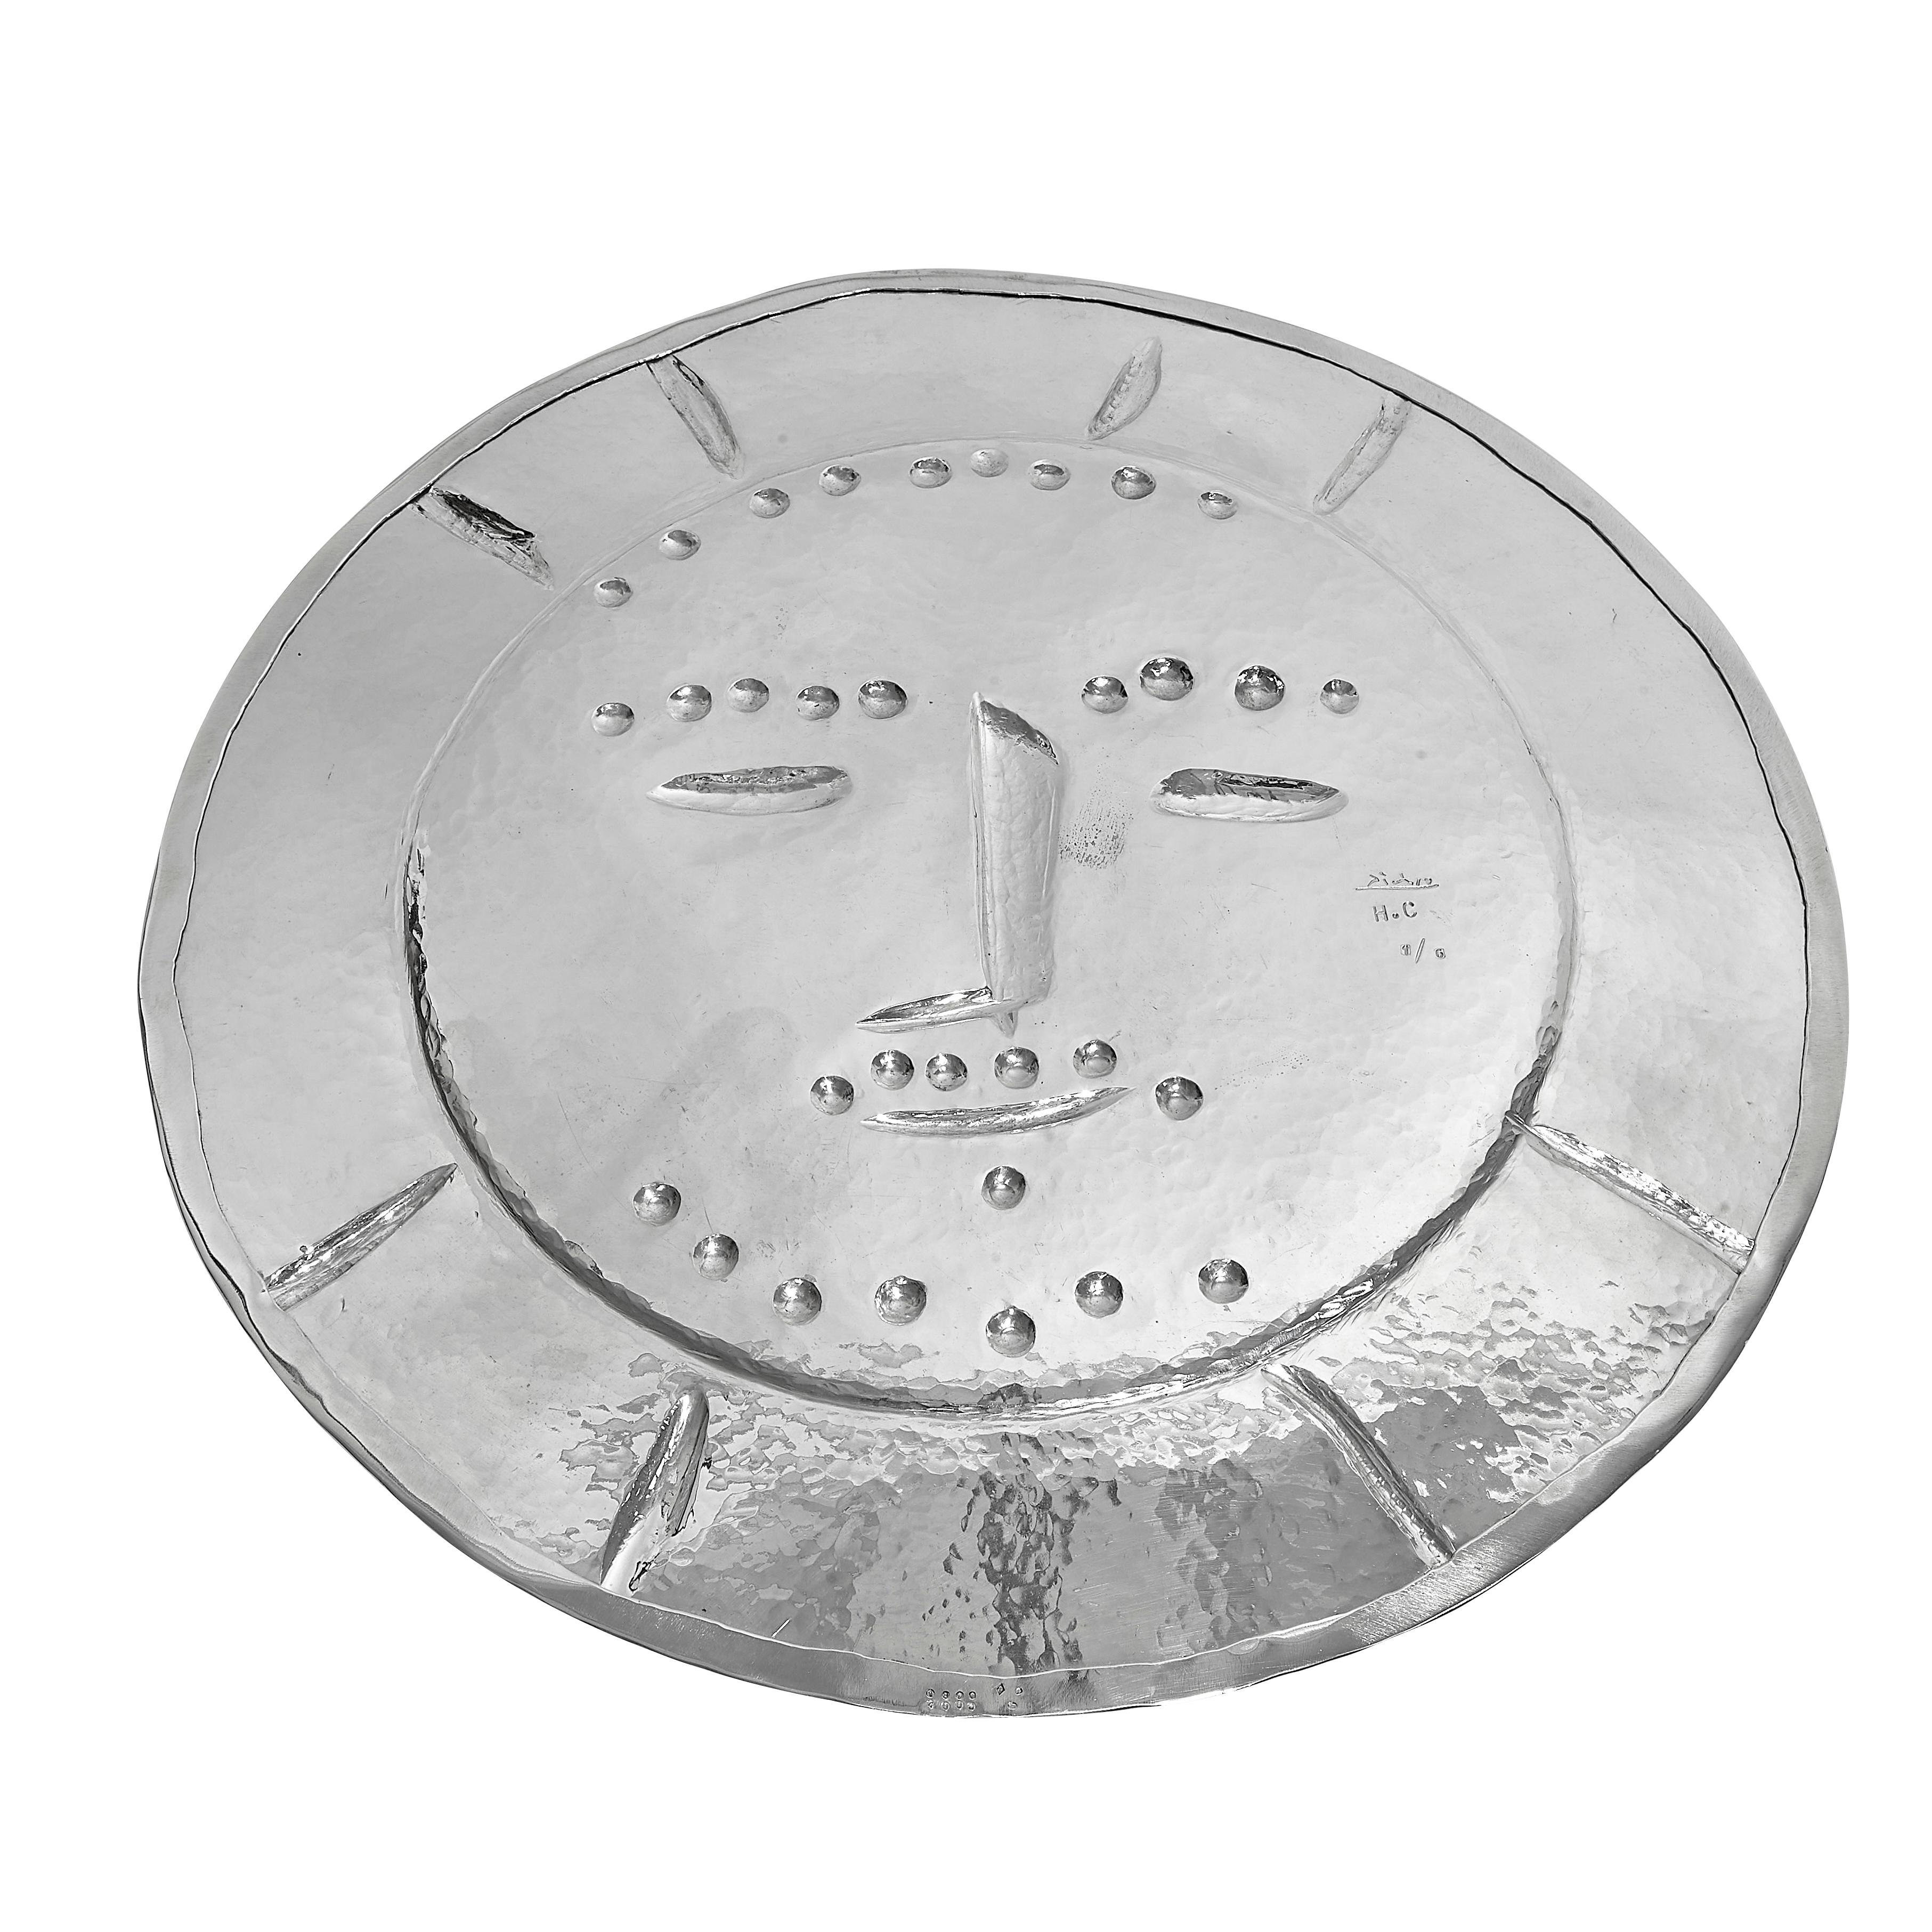 PABLO PICASSO (1881-1973) 
Dormeur (A. R. 343)

Silver repoussé plate conceived in 1956 and executed in silver by Pierre Hugo in 1977, from an edition size of 20 + 2 exemplaires d'artiste + 2 exemplaires d'auteur + HC 1/6 to 6/6. 